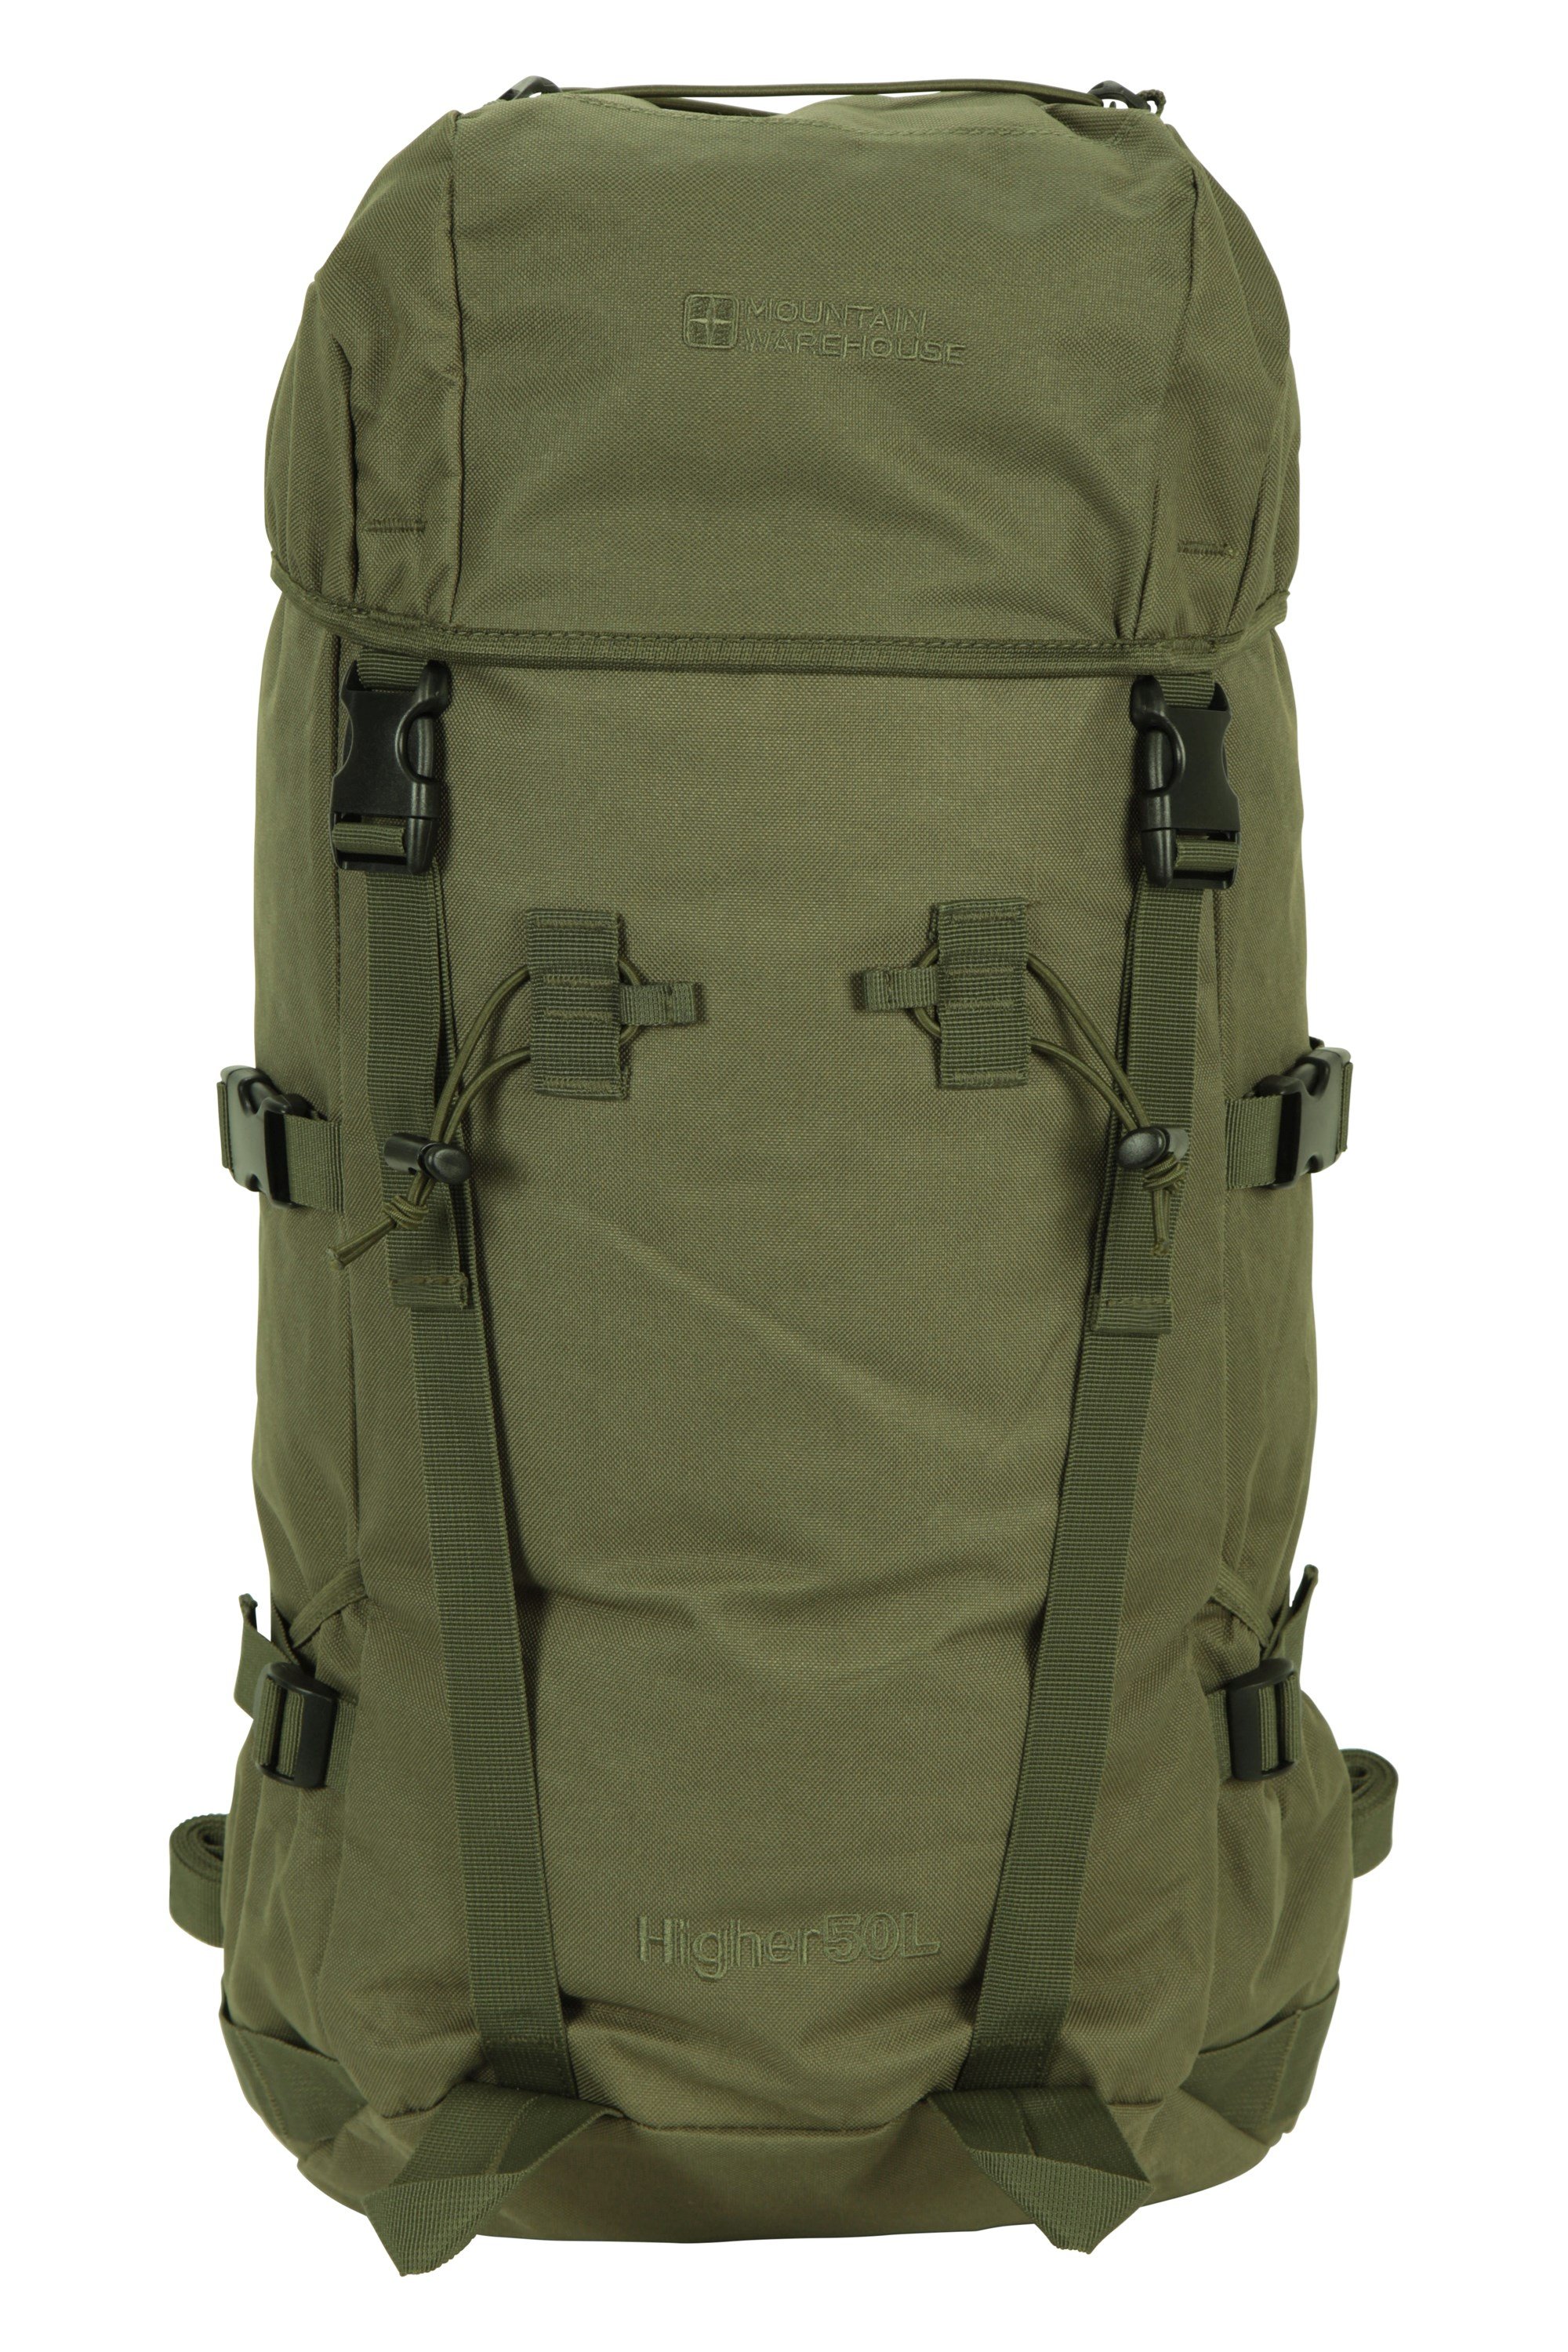 Higher 50L Backpack | Mountain Warehouse GB